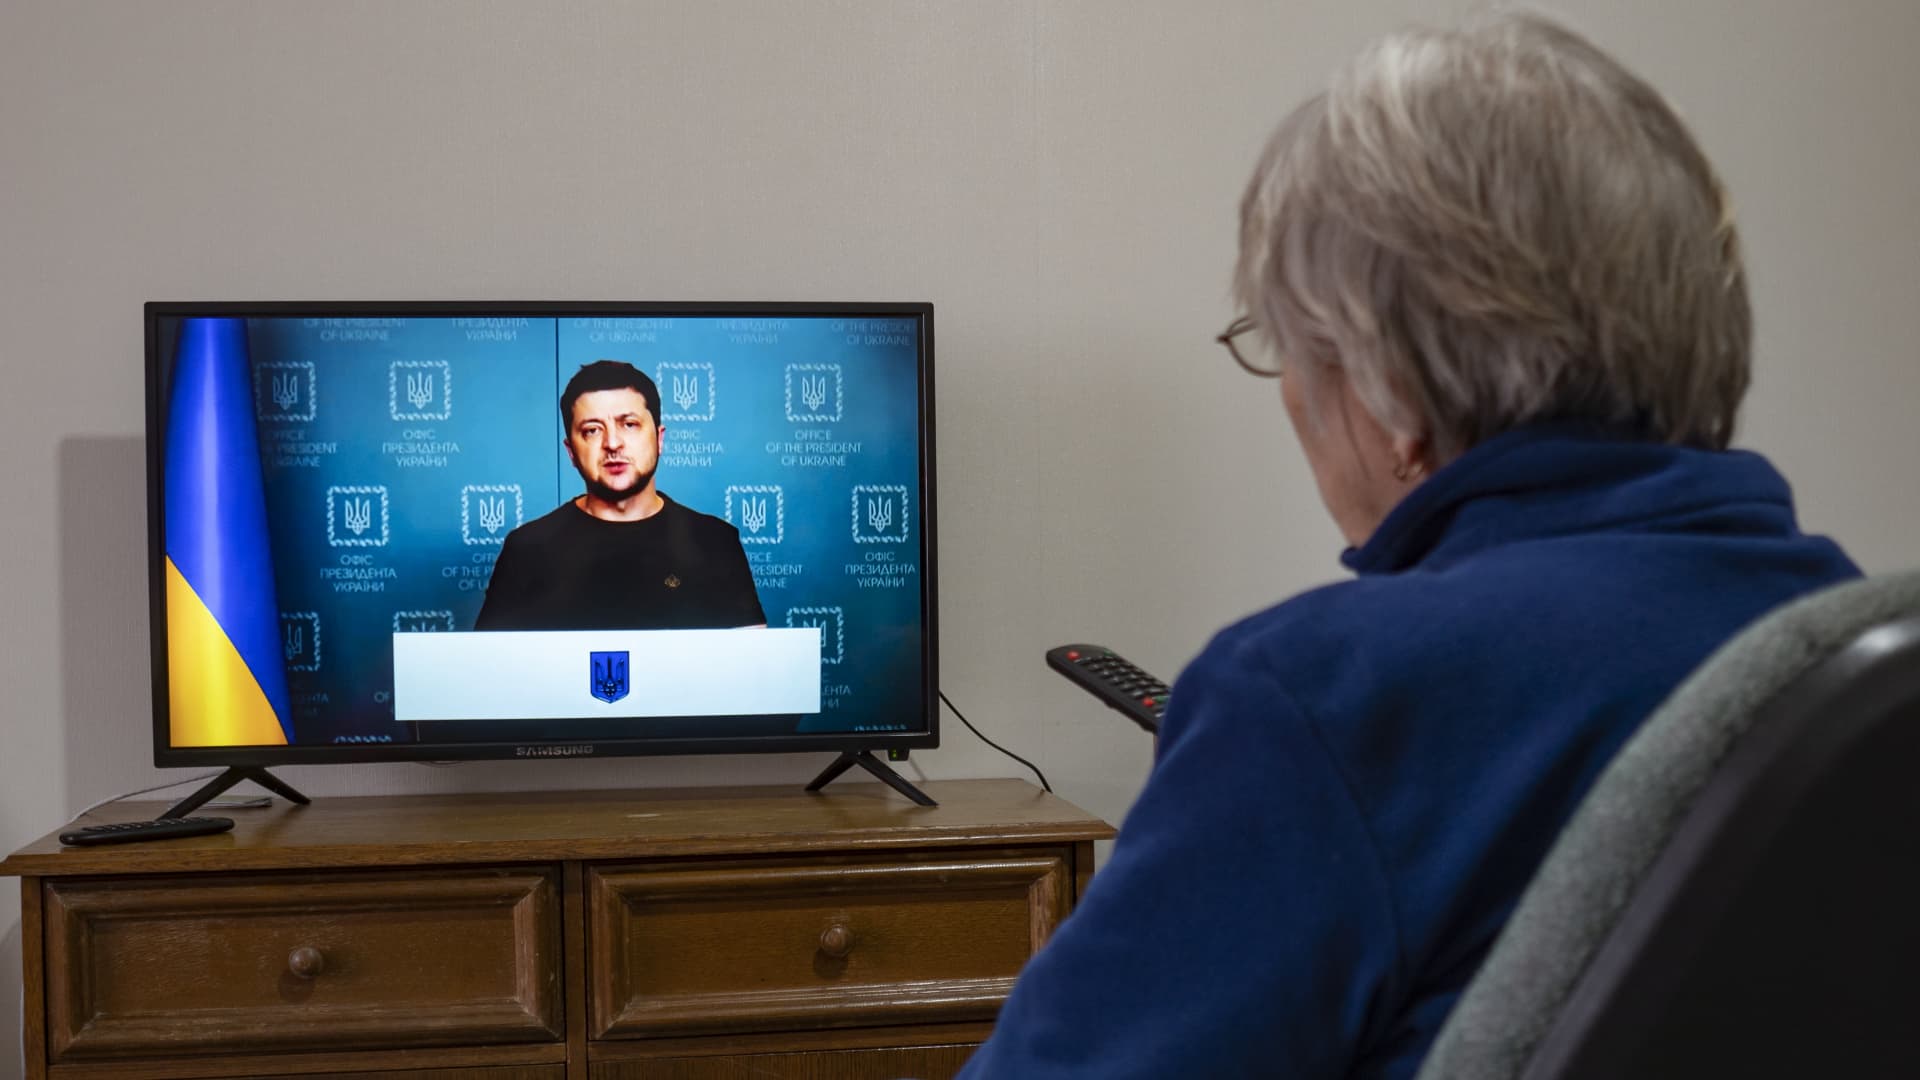 President Volodymyr Zelensky delivers an urgent televised address to the Ukrainian nation on March 2, 2022.